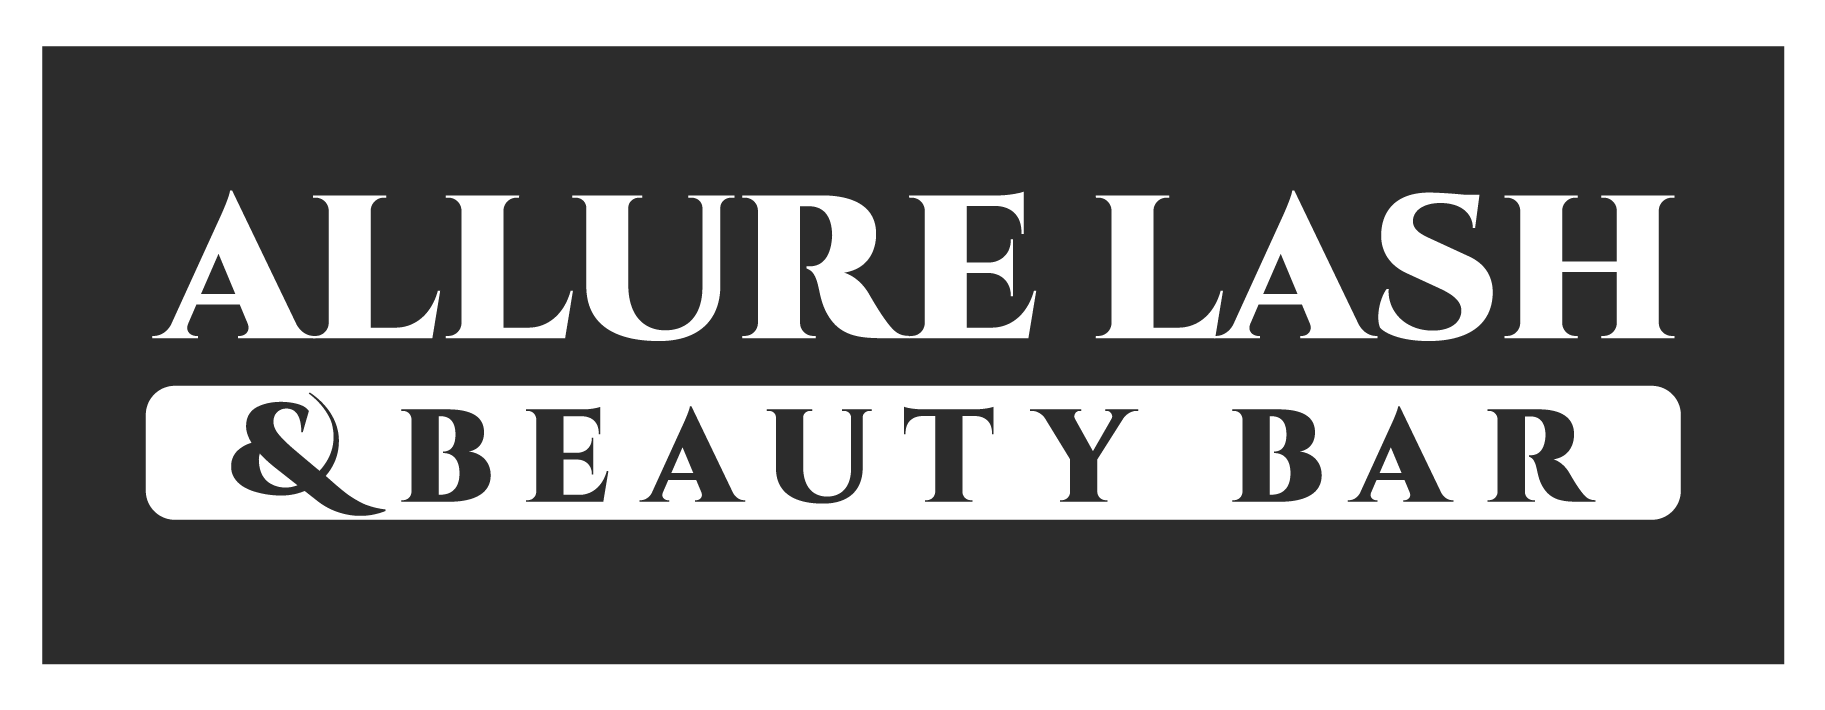 Allure Lash And Beauty Bar